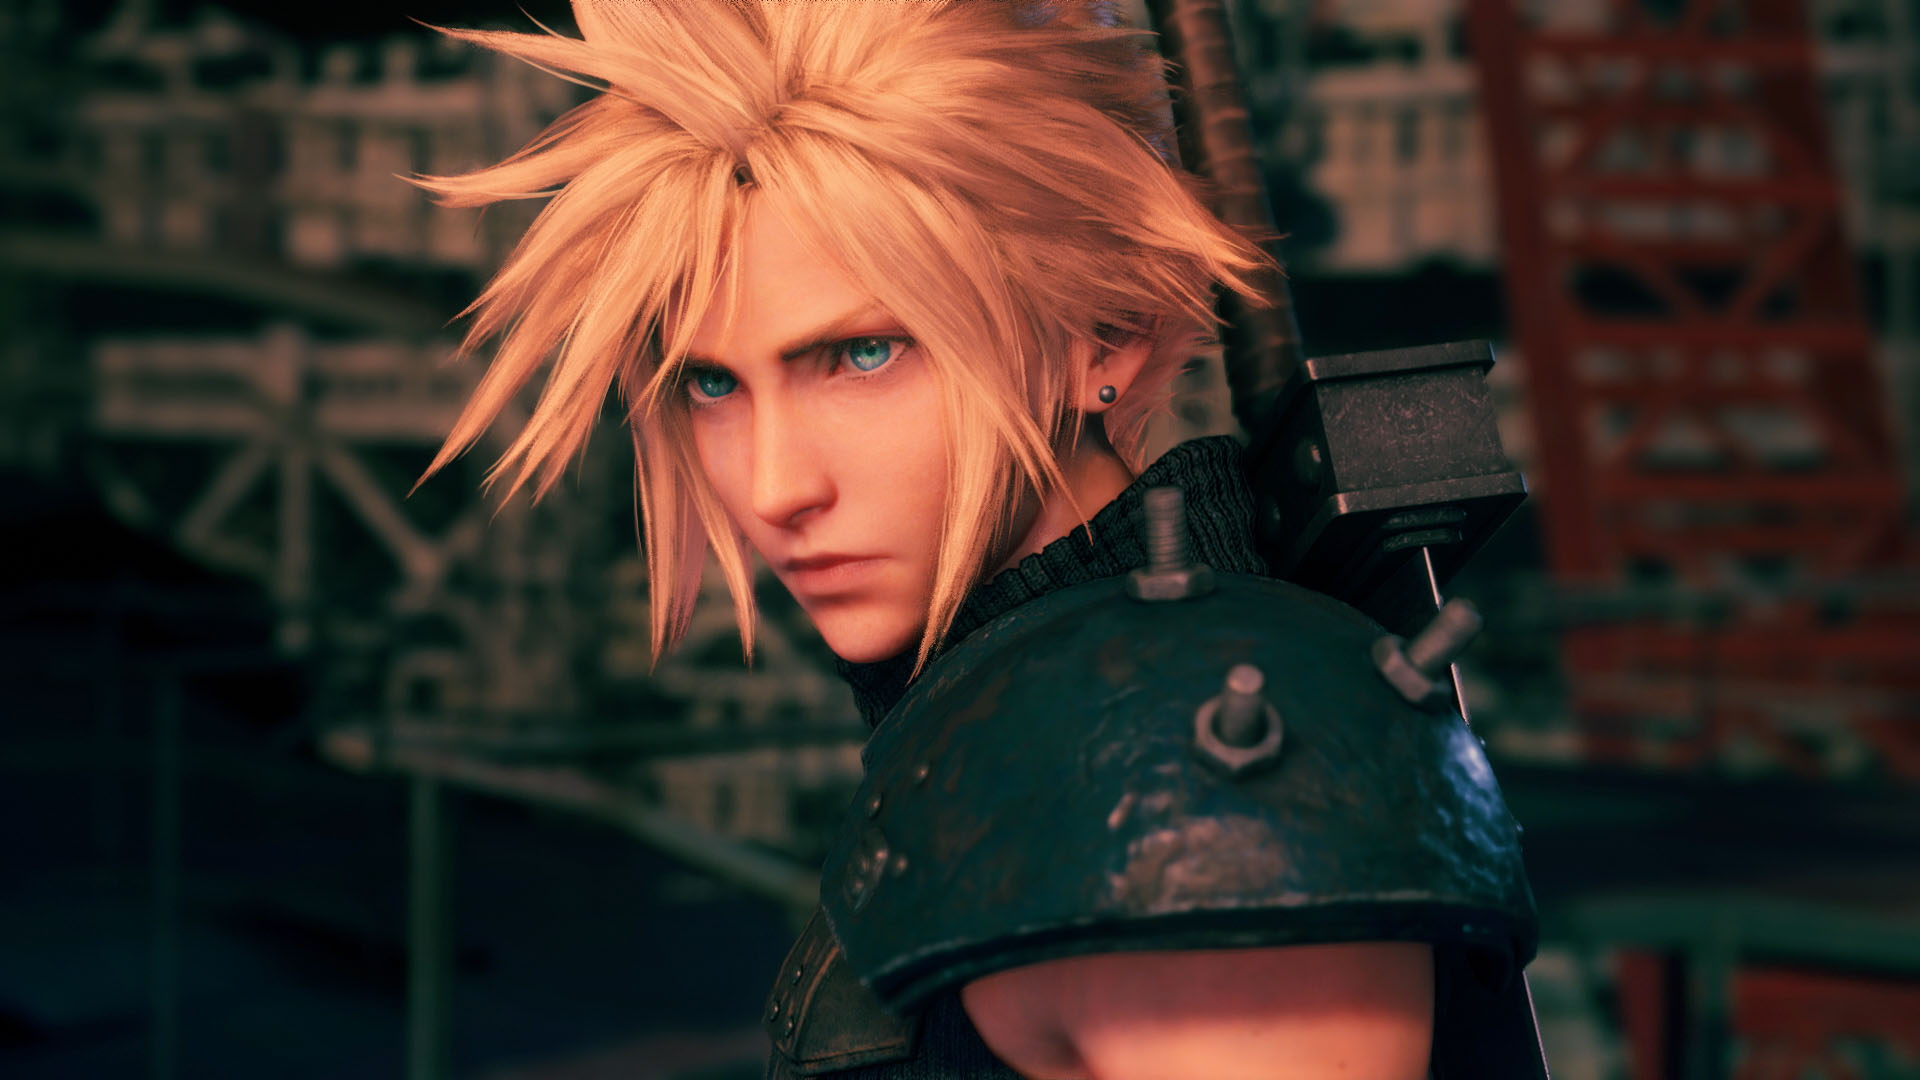 An image shows Cloud Strife from Final Fantasy 7 Remake